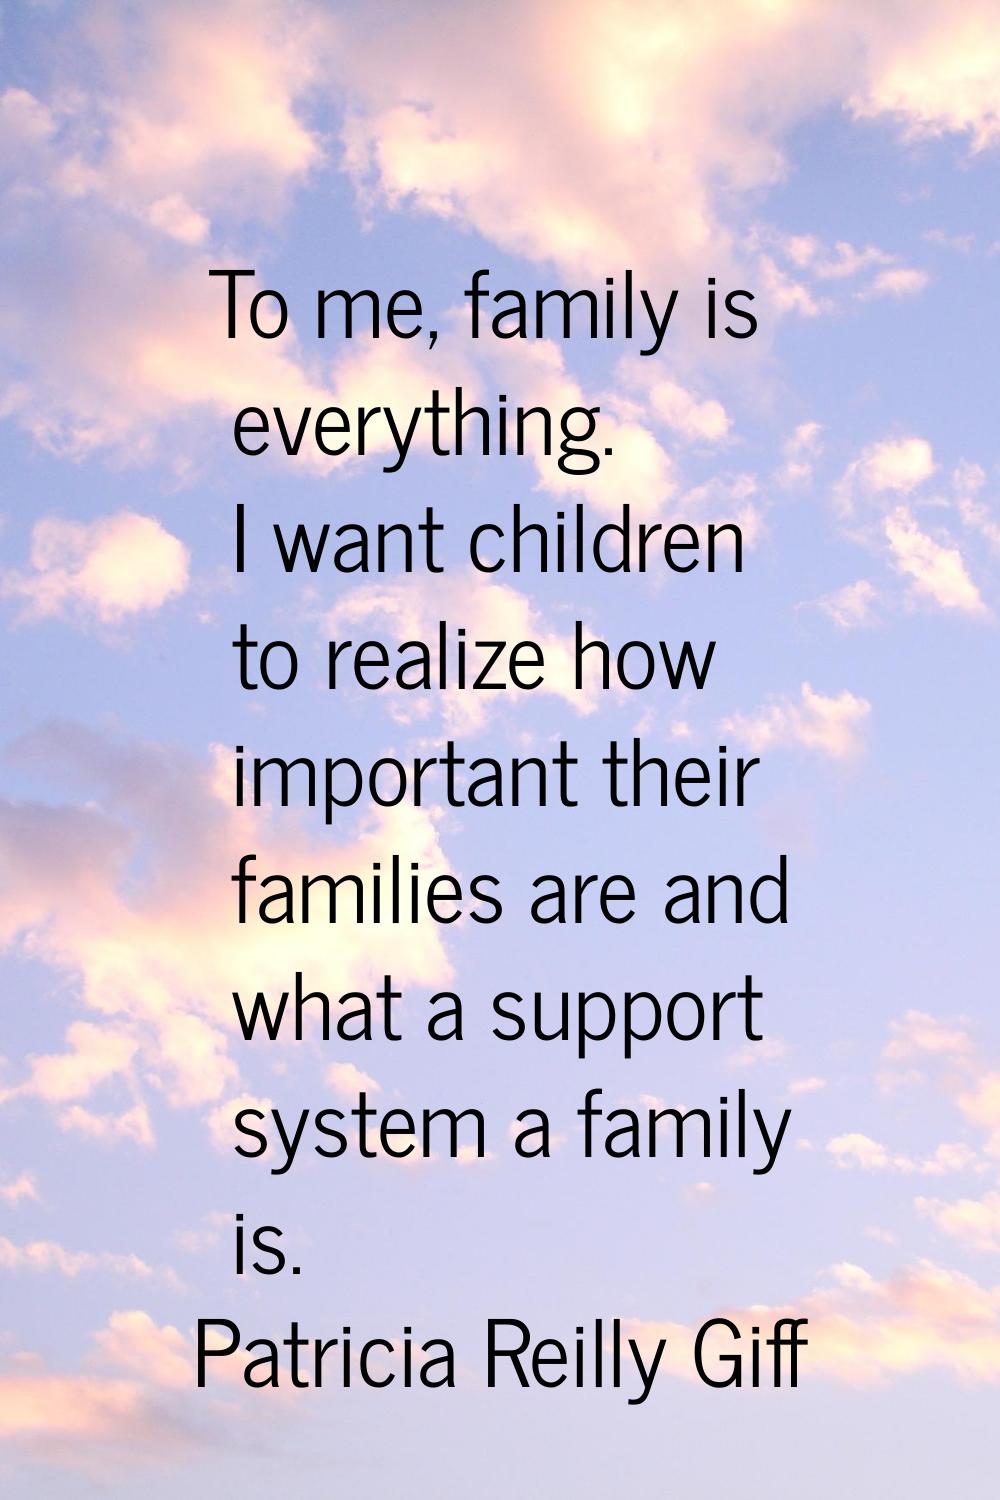 To me, family is everything. I want children to realize how important their families are and what a